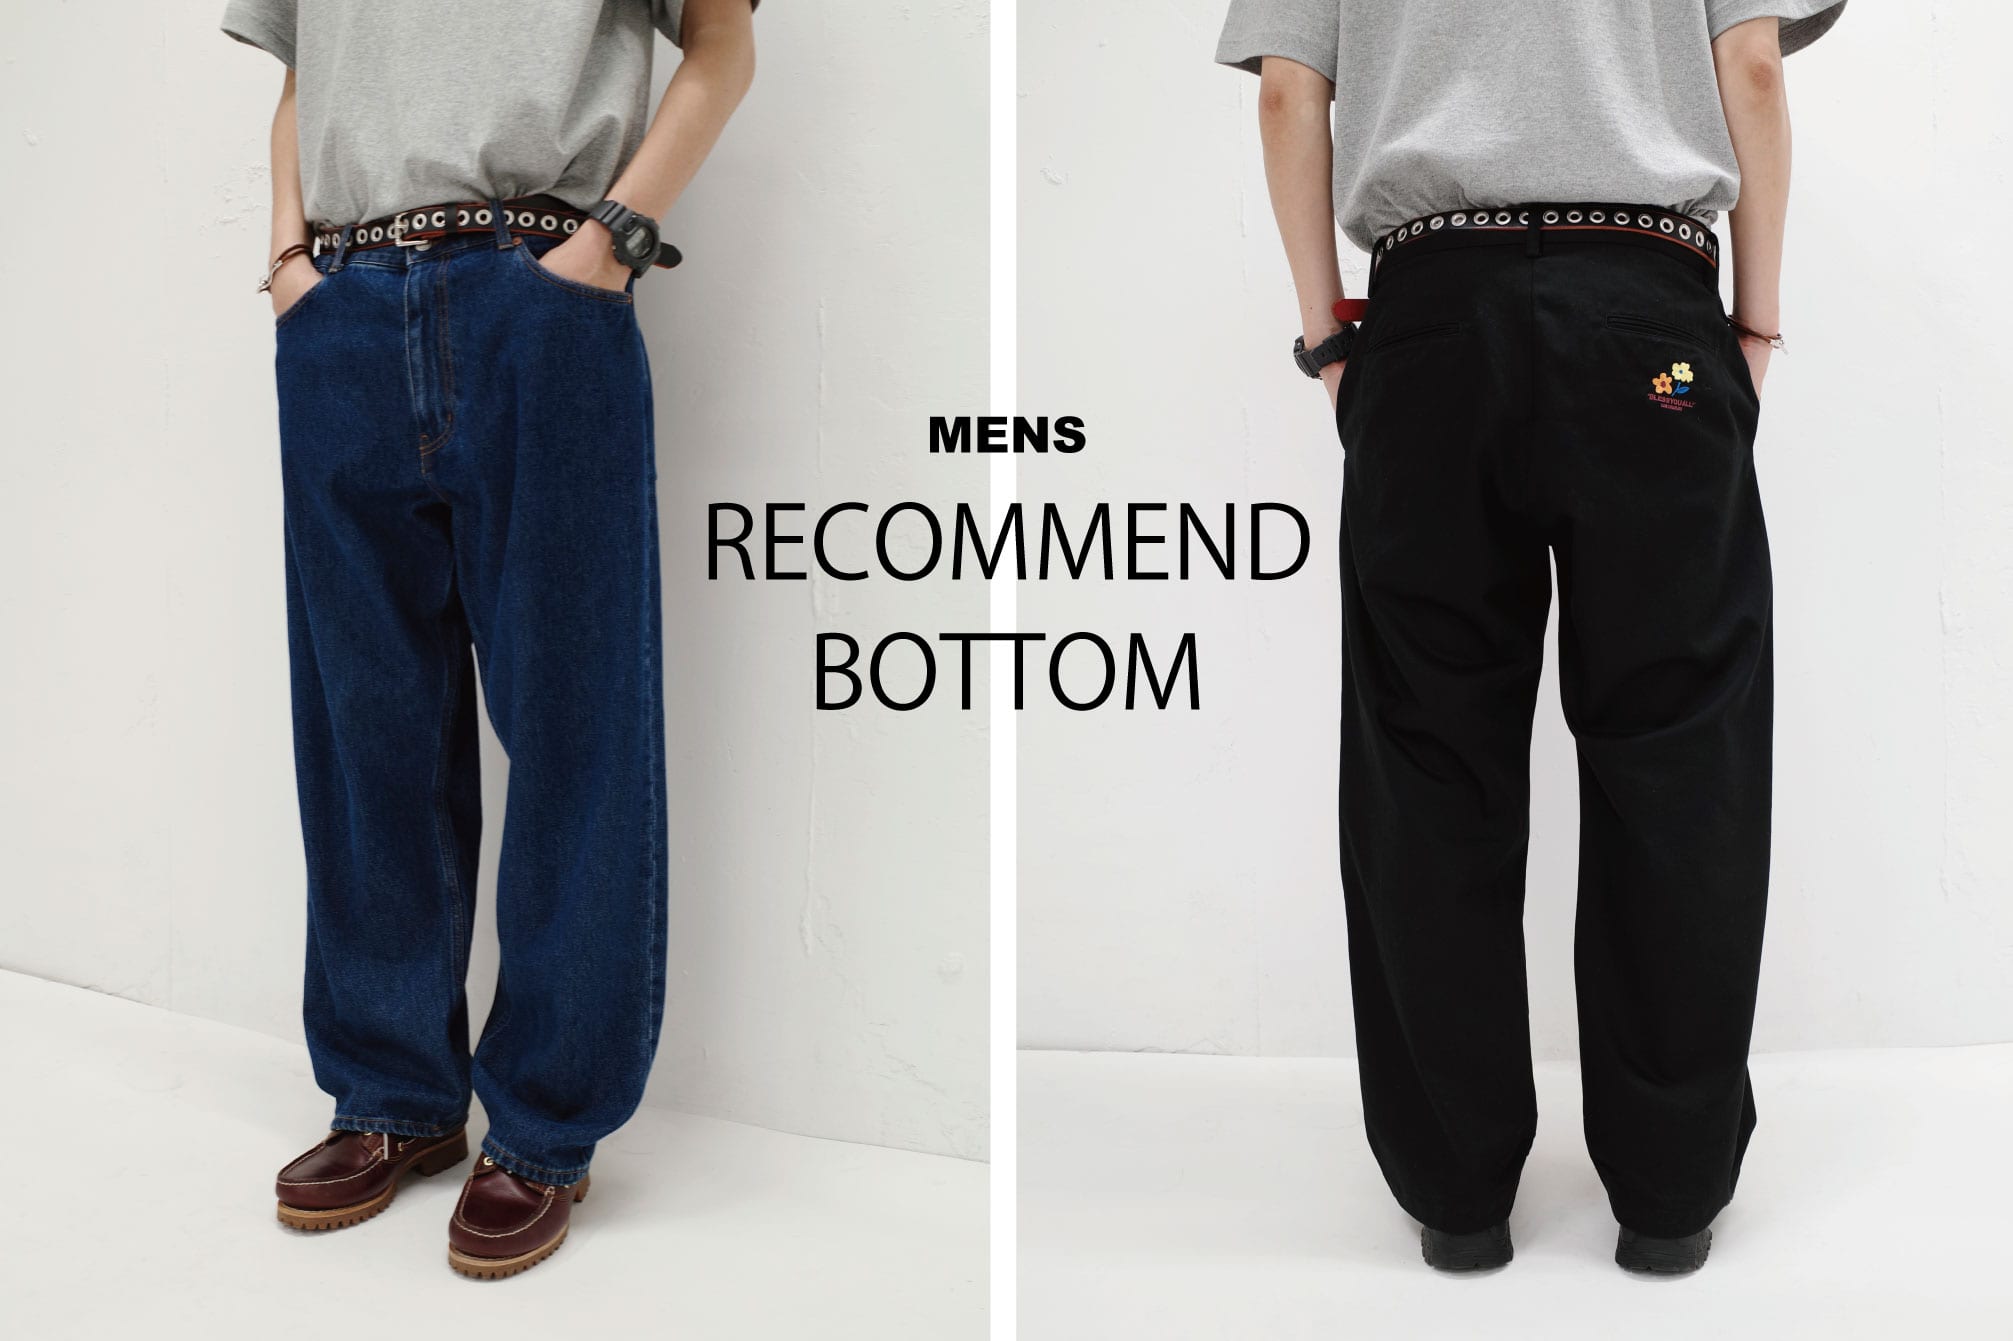 WHO’S WHO gallery RECOMMEND NOW【MENS BOTTOM】